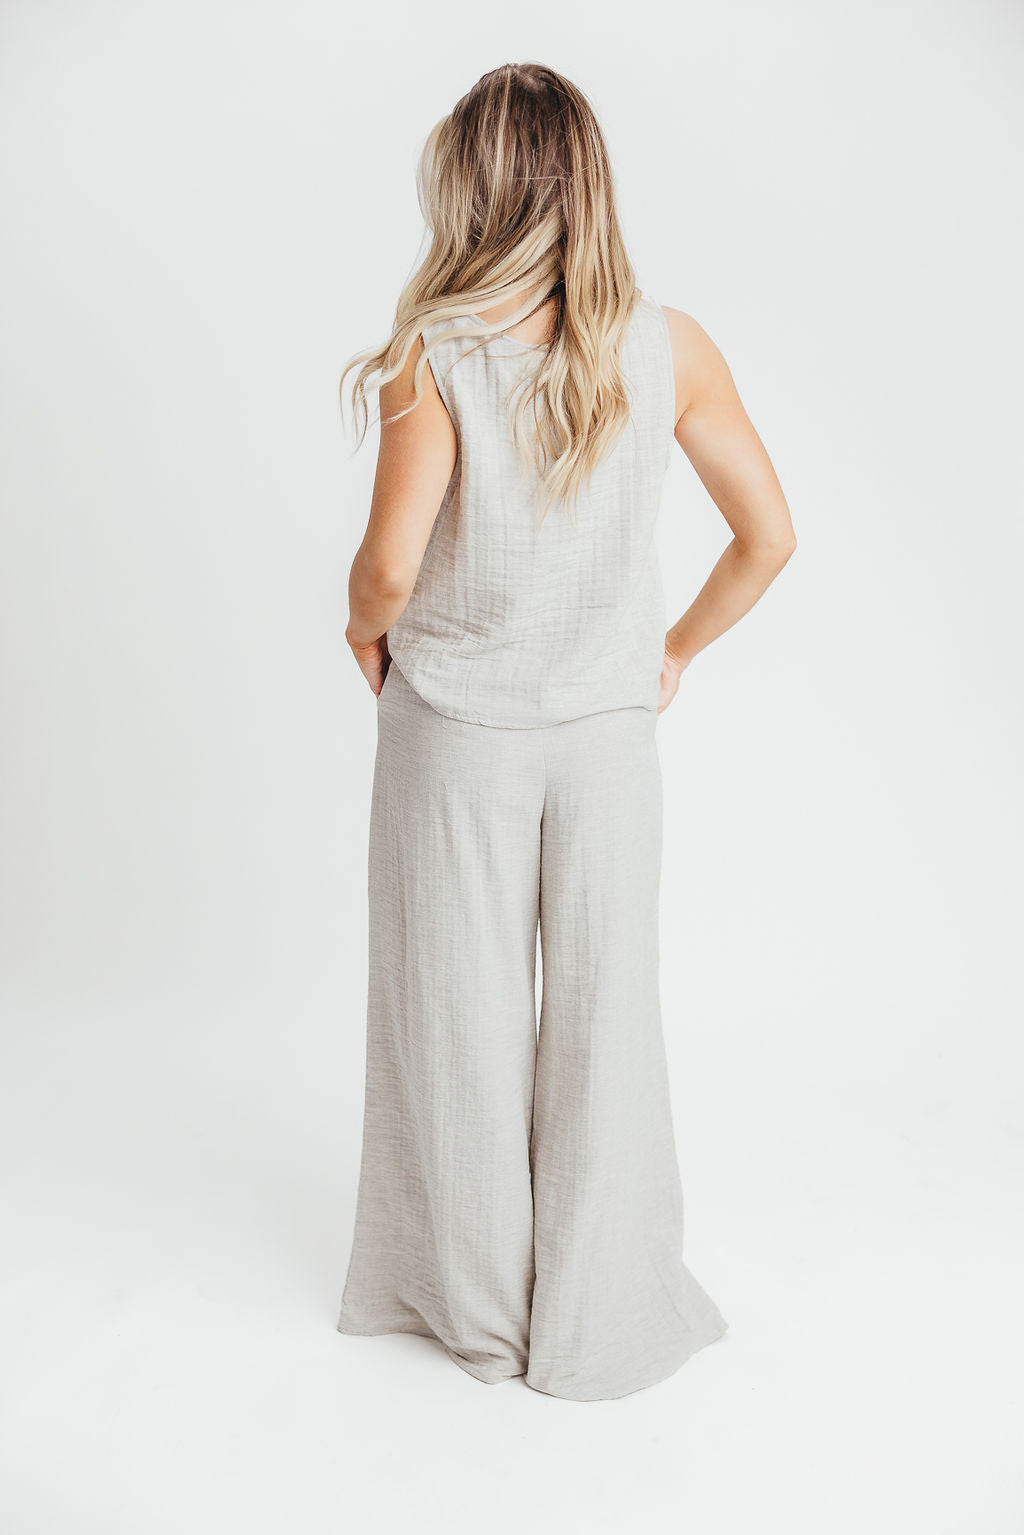 Love Lock Sleeveless Top and Pant Set in Linen Grey - 100% Cotton